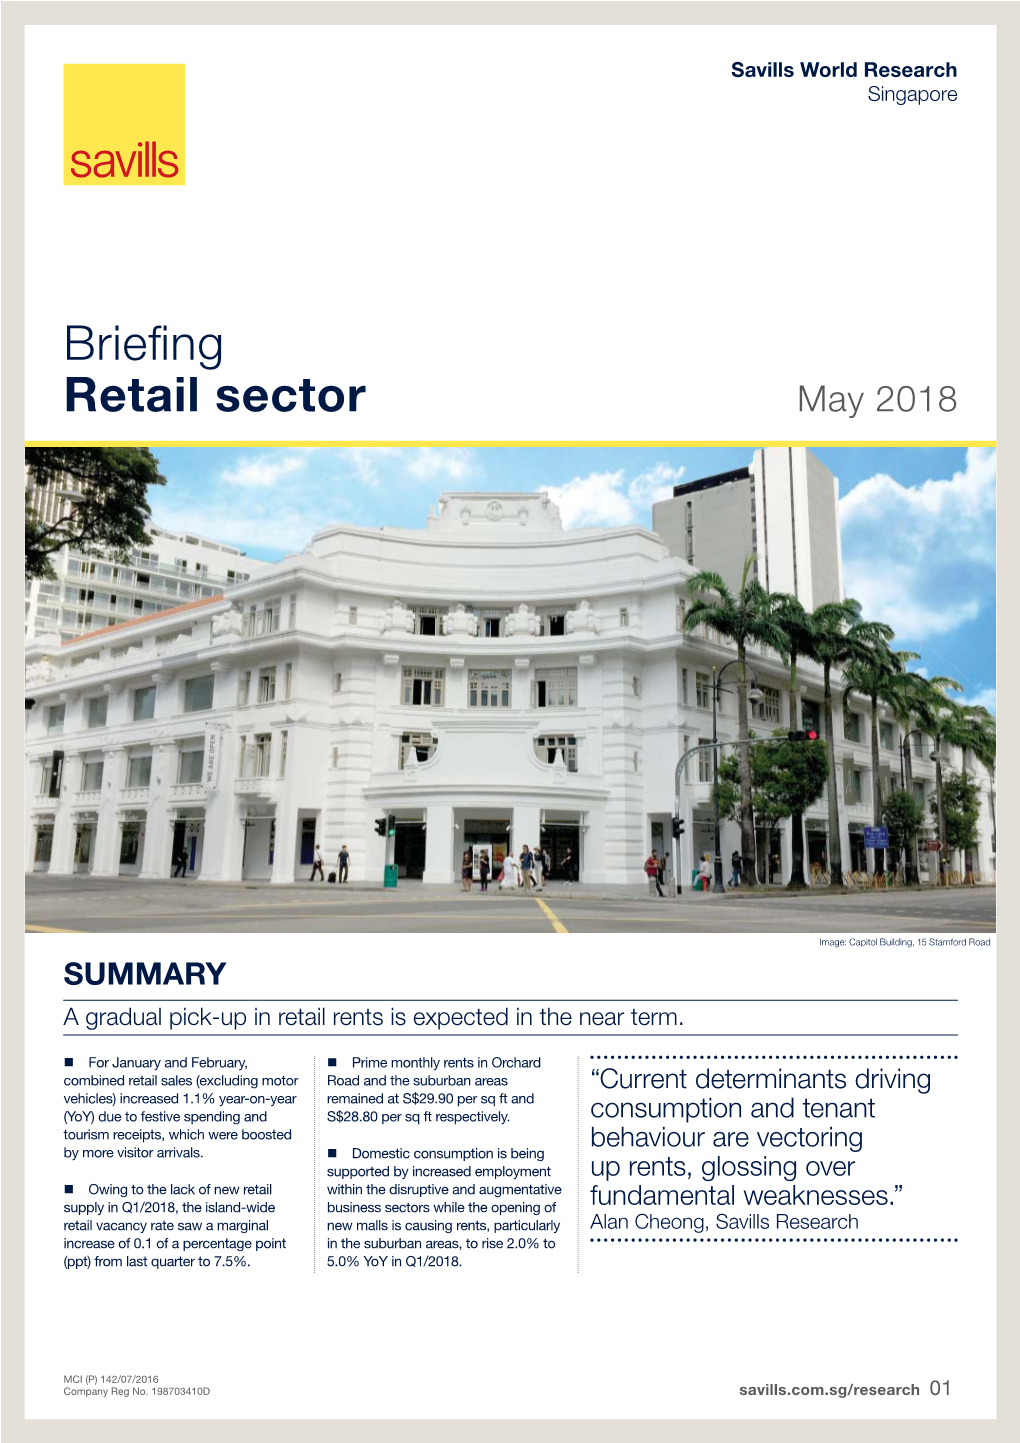 Briefing Retail Sector